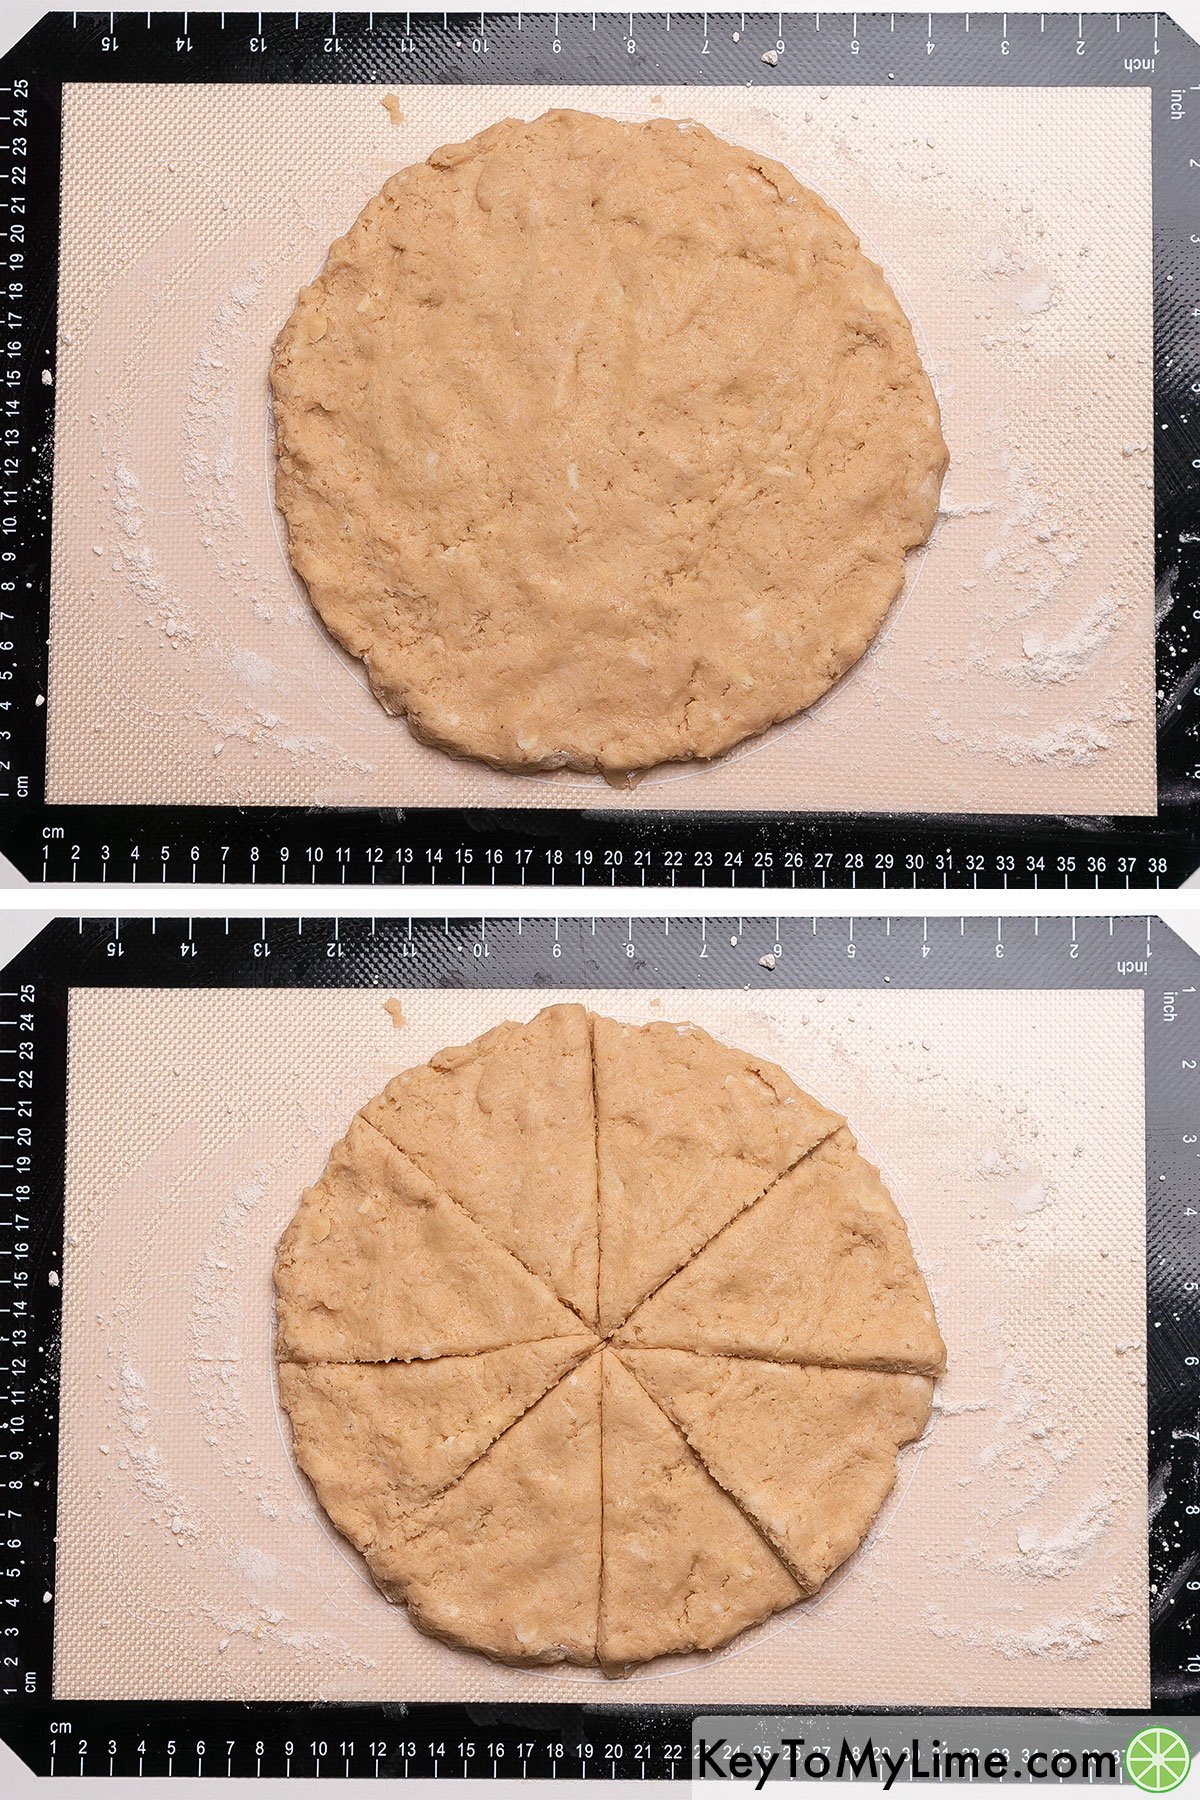 Rolling Bisquick dough out into a disc, then cutting it into 8 equal wedges.